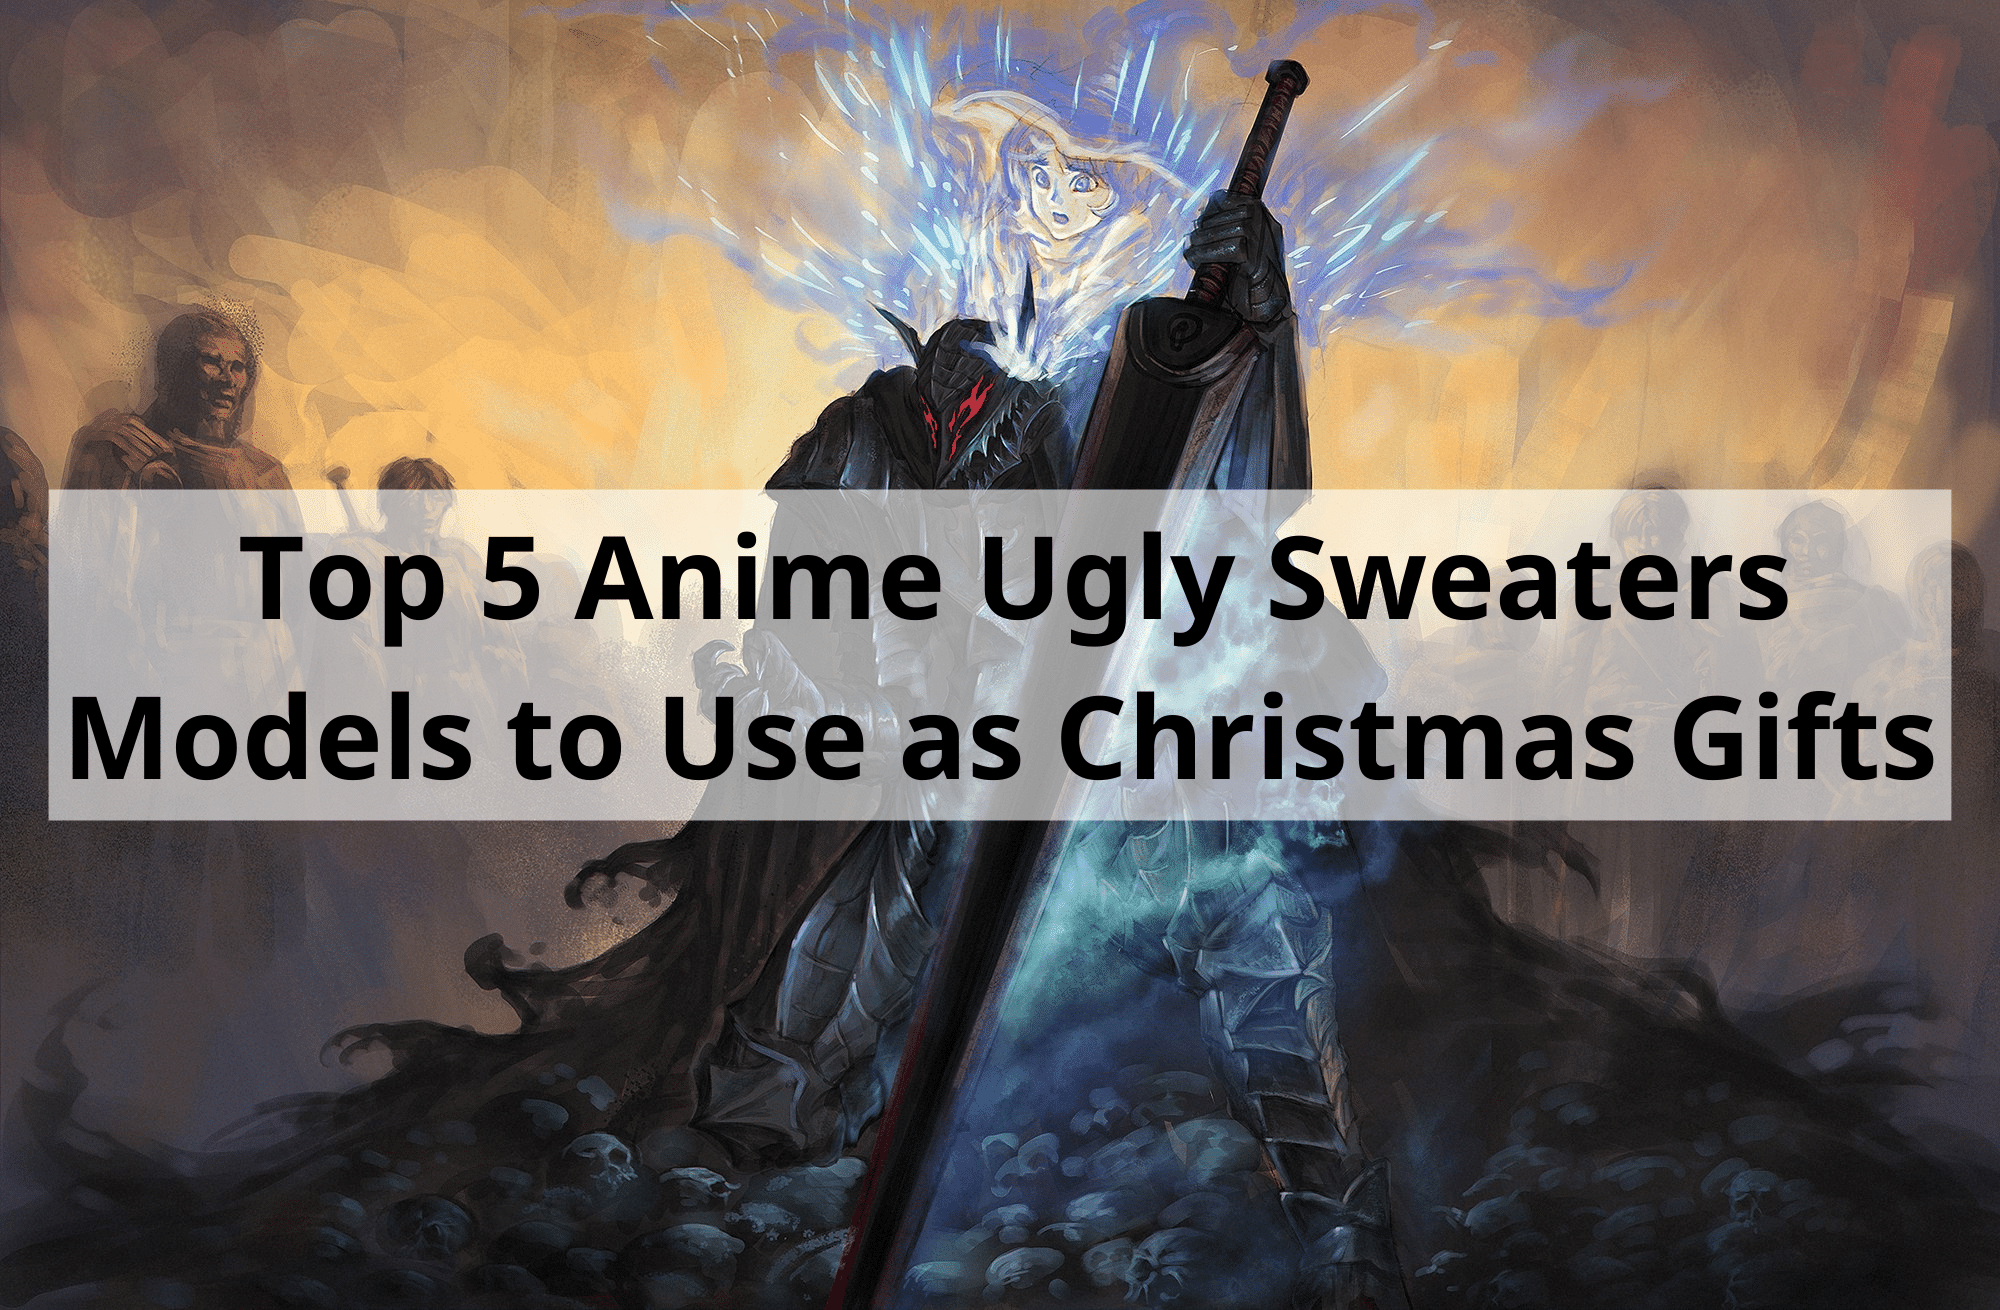 Top 5 Anime Ugly Sweaters Models to Use as Christmas Gifts